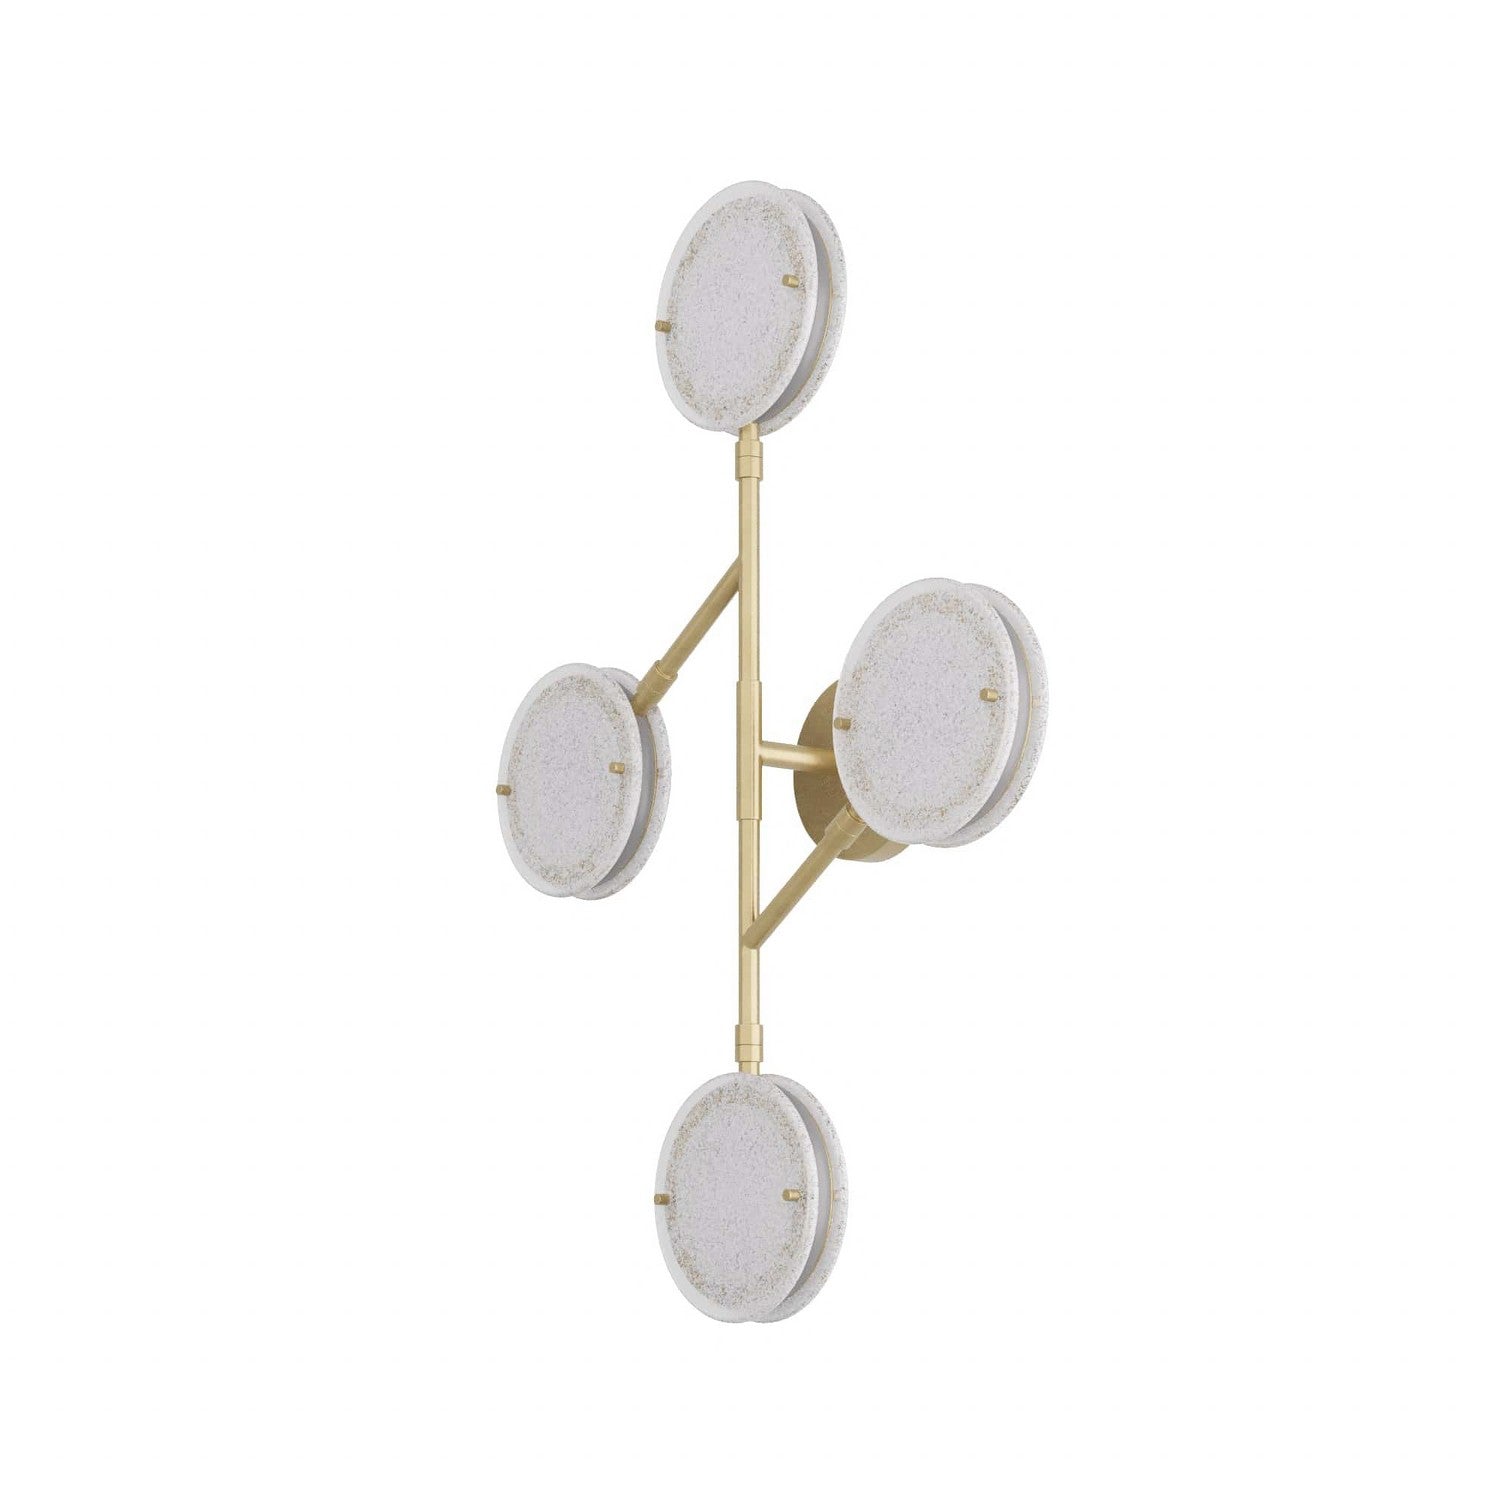 LED Wall Sconce from the Meridian collection in Clear Seedy finish